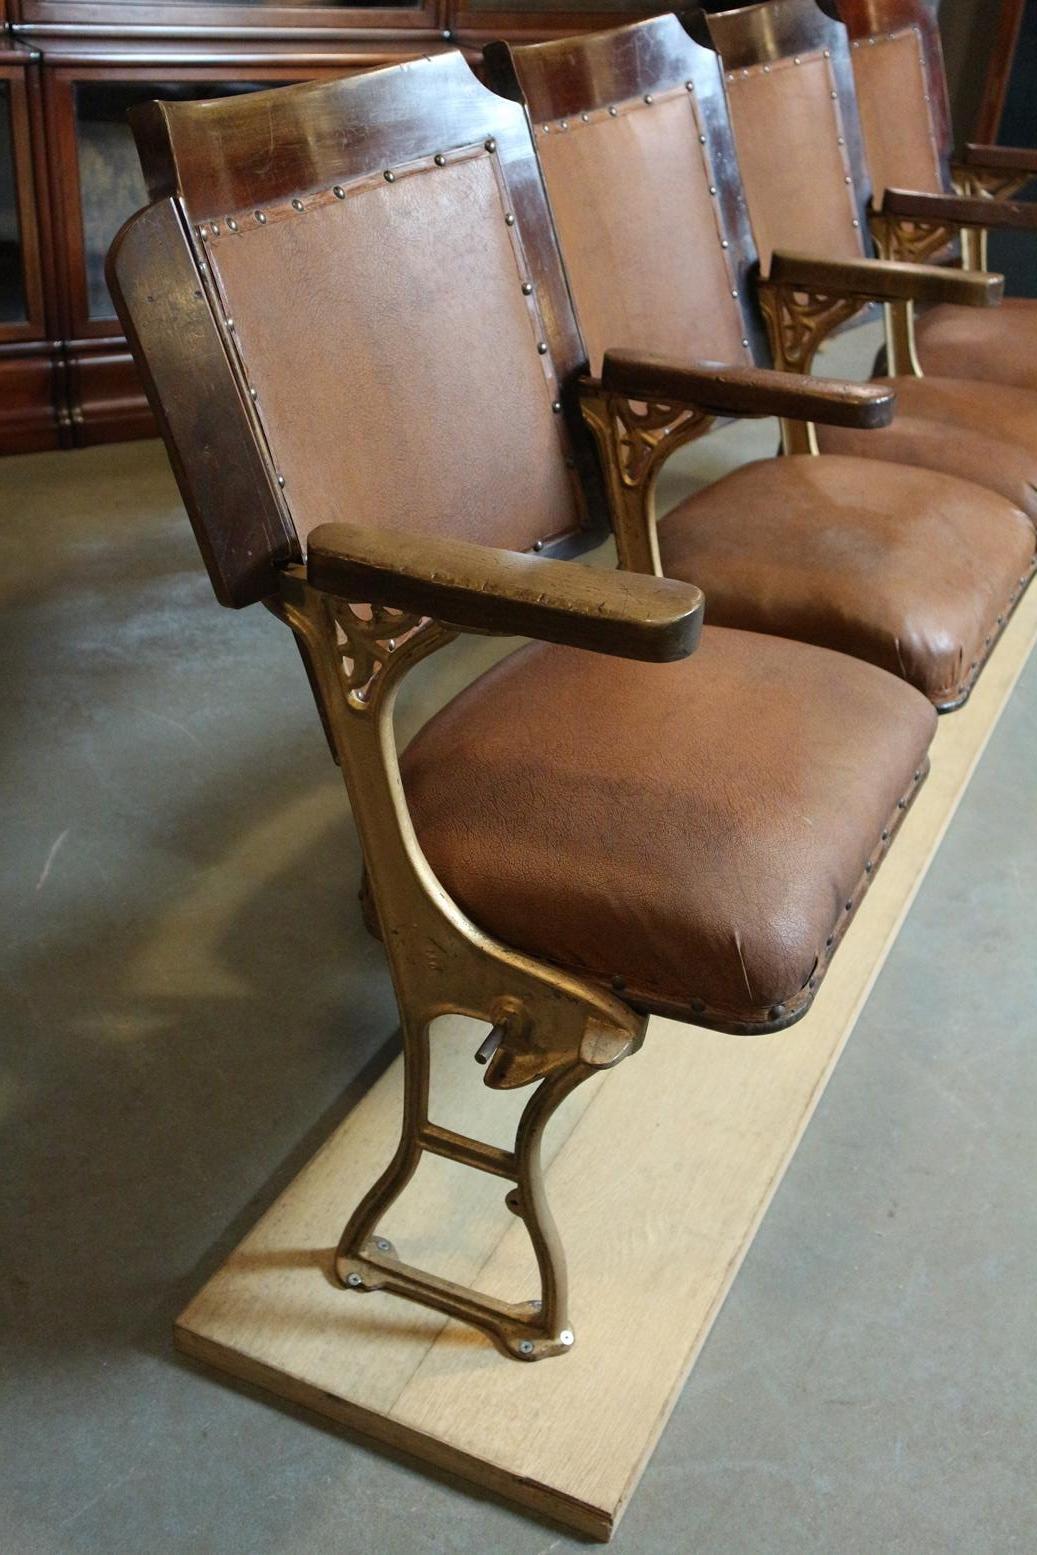 Theater seats Original set of 4 theater seats from the 1920s in good and original condition. Can be taken apart.